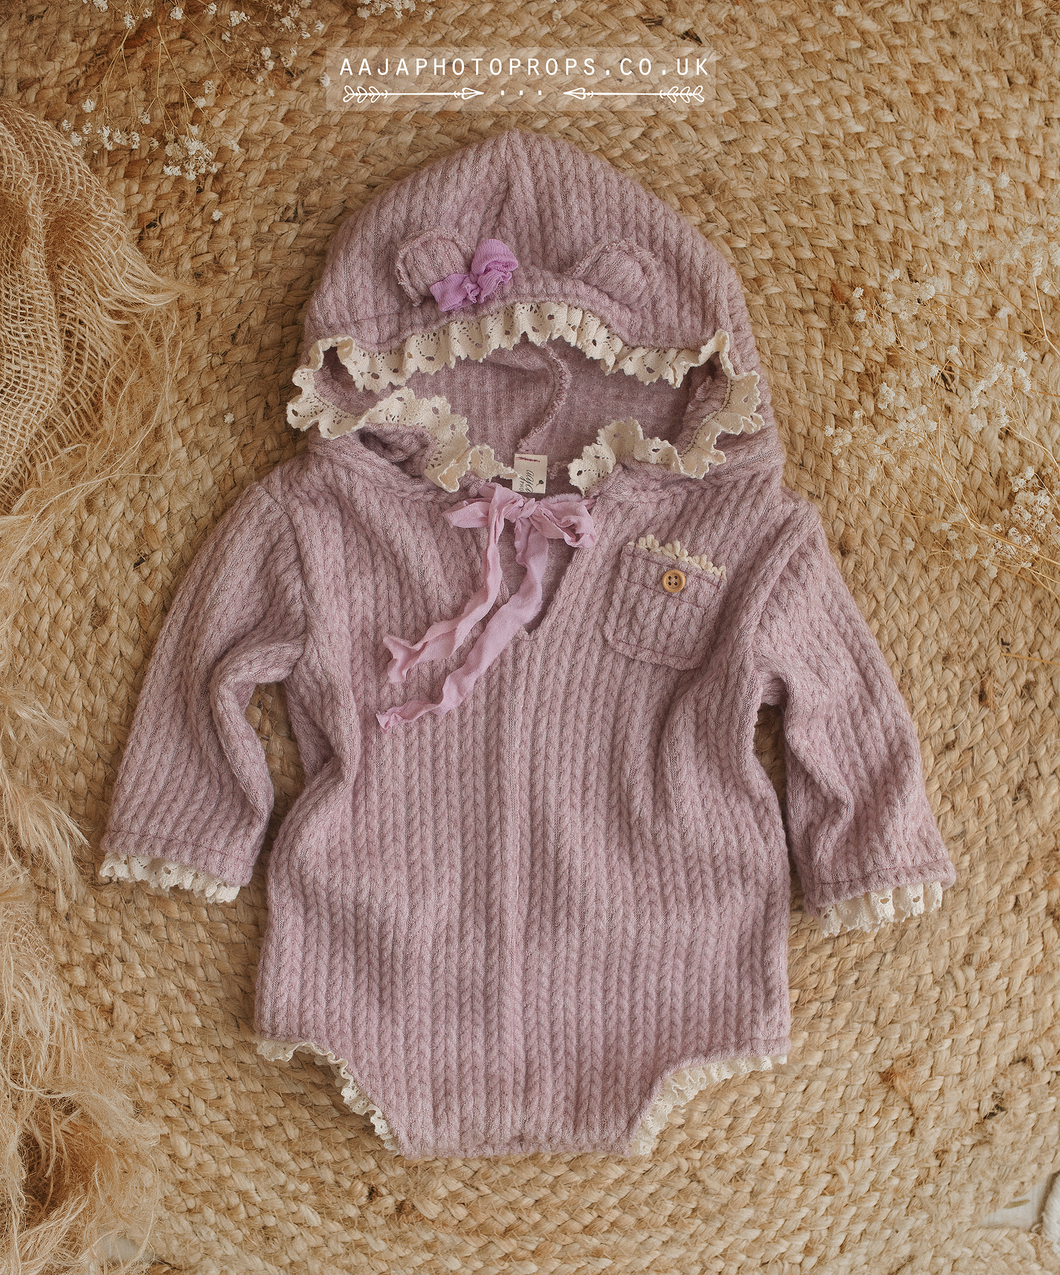 Vintage style hooded bear romper, 9-12 months size, pink, lilac, lace, boho, RTS